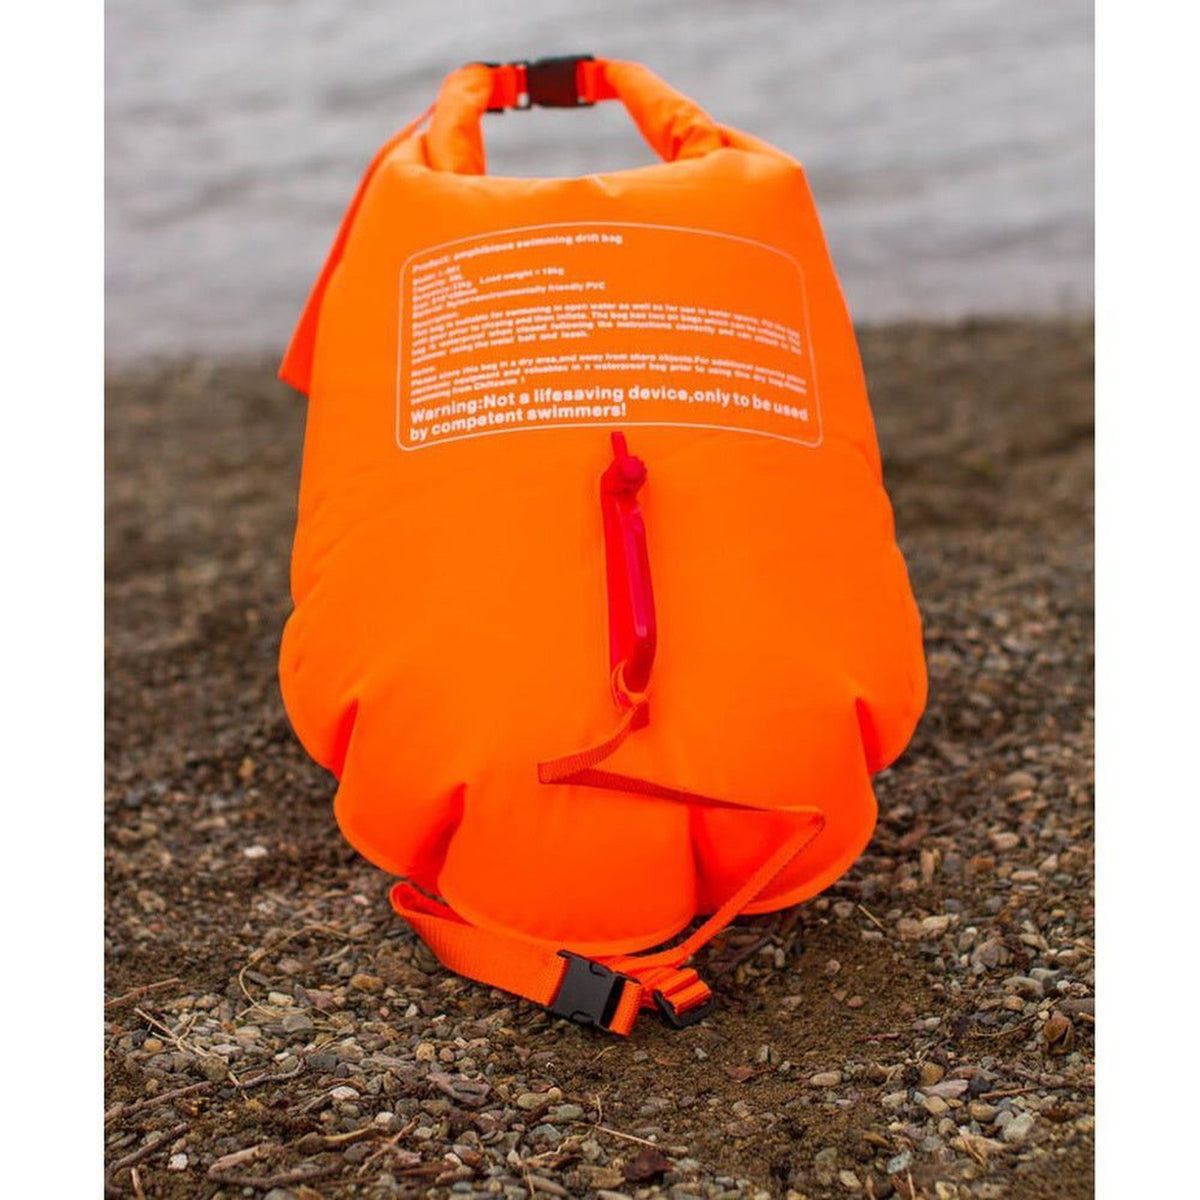 Swim Secure Tow Float and Dry Bag - 28L